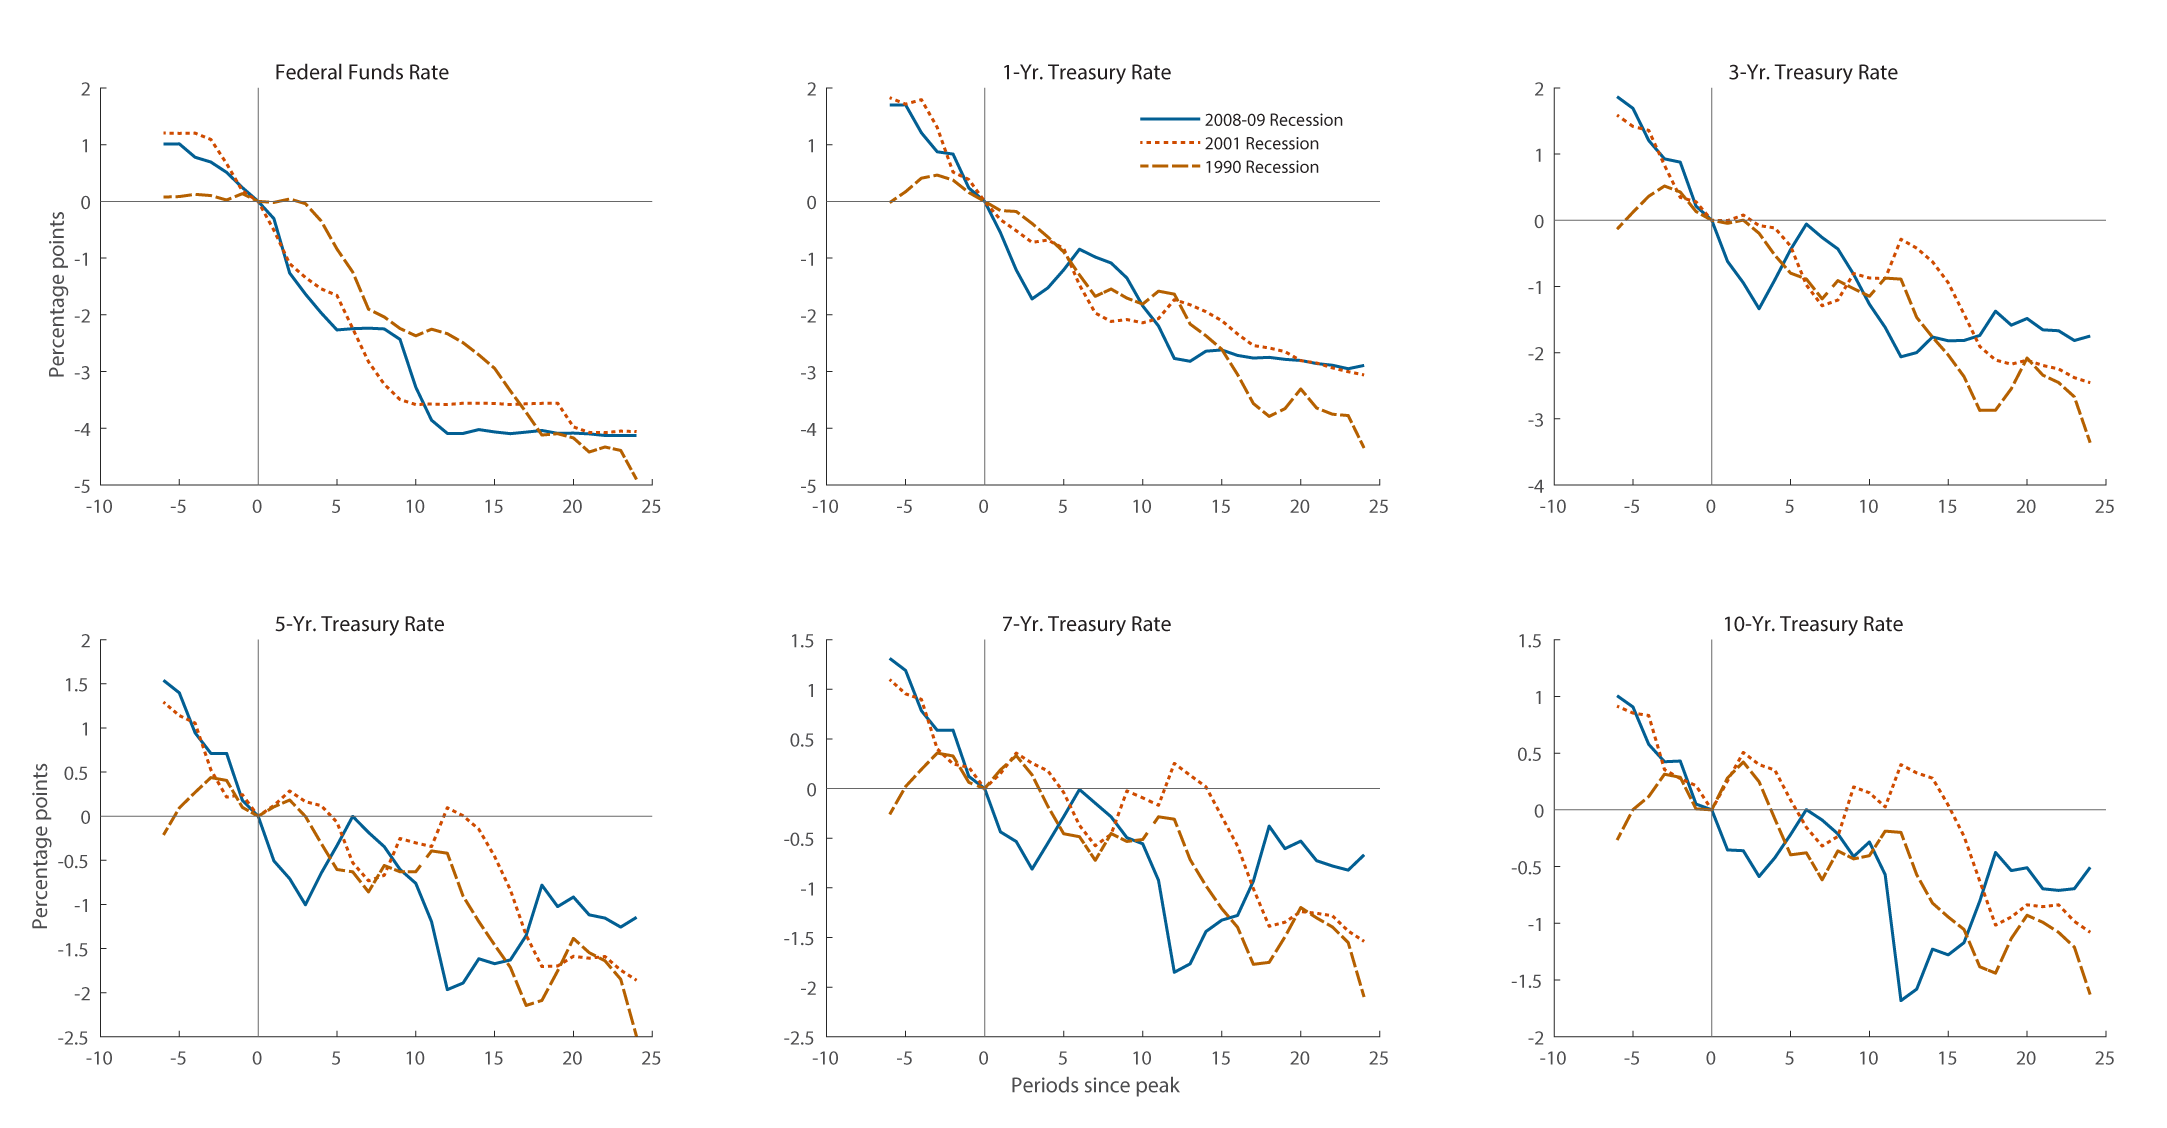 Figure 2. Changes in Nominal Interest Rates Around Recent Business Cycle Peaks. See accessible link for data description.